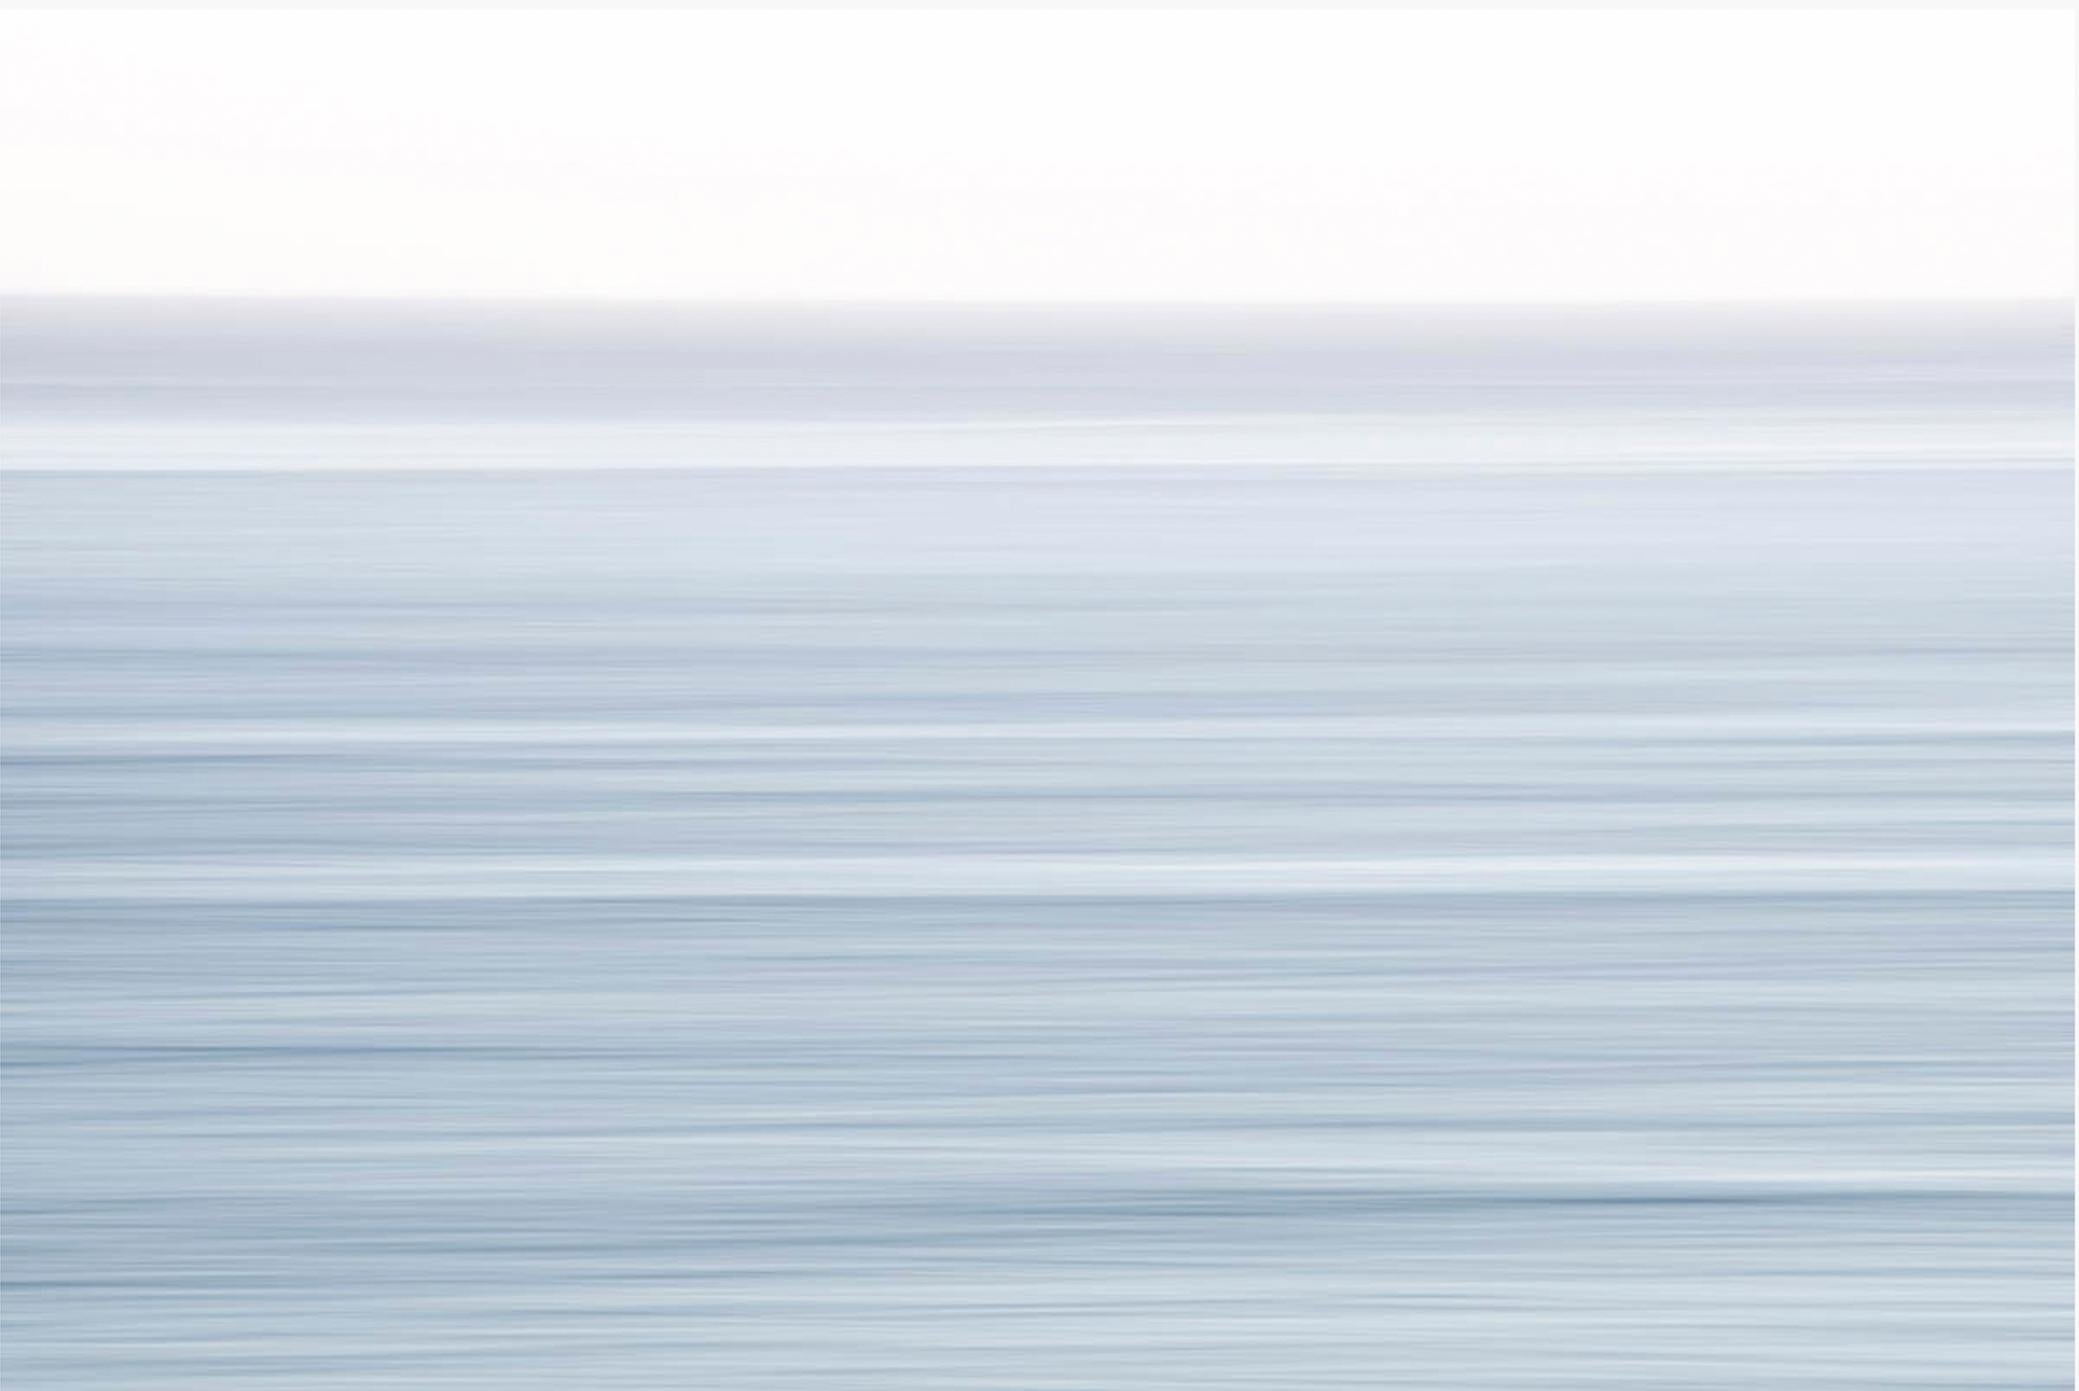 Tori Gagne Abstract Photograph - "Misty Morning" Contemporary Photograph, 16" x 24"